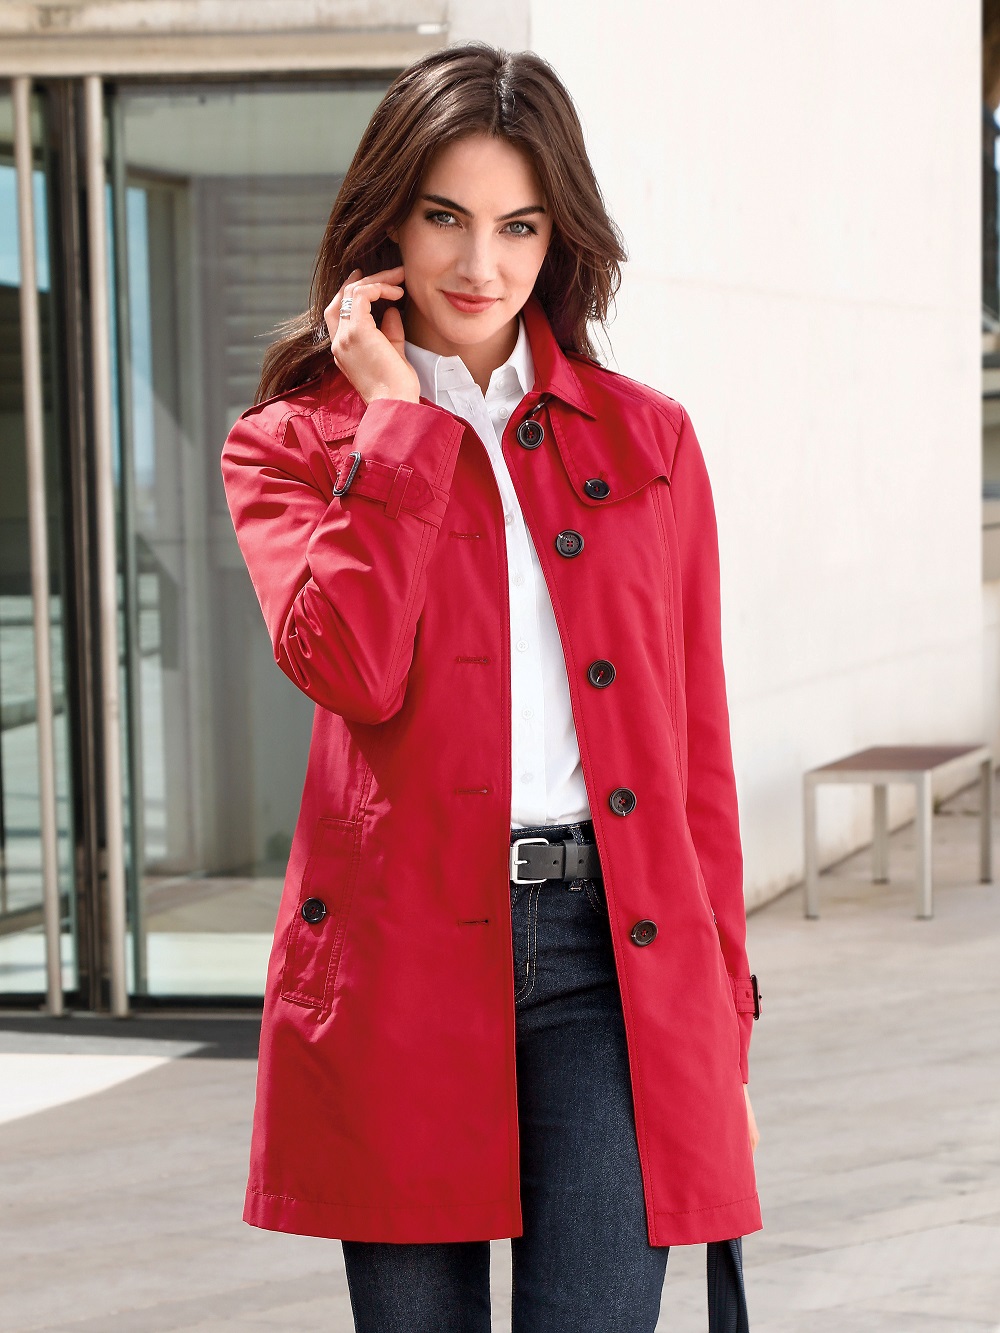 People 1000x1333 women model brunette red coat coats white shirt looking at viewer standing shirt open coat closed mouth trench coat